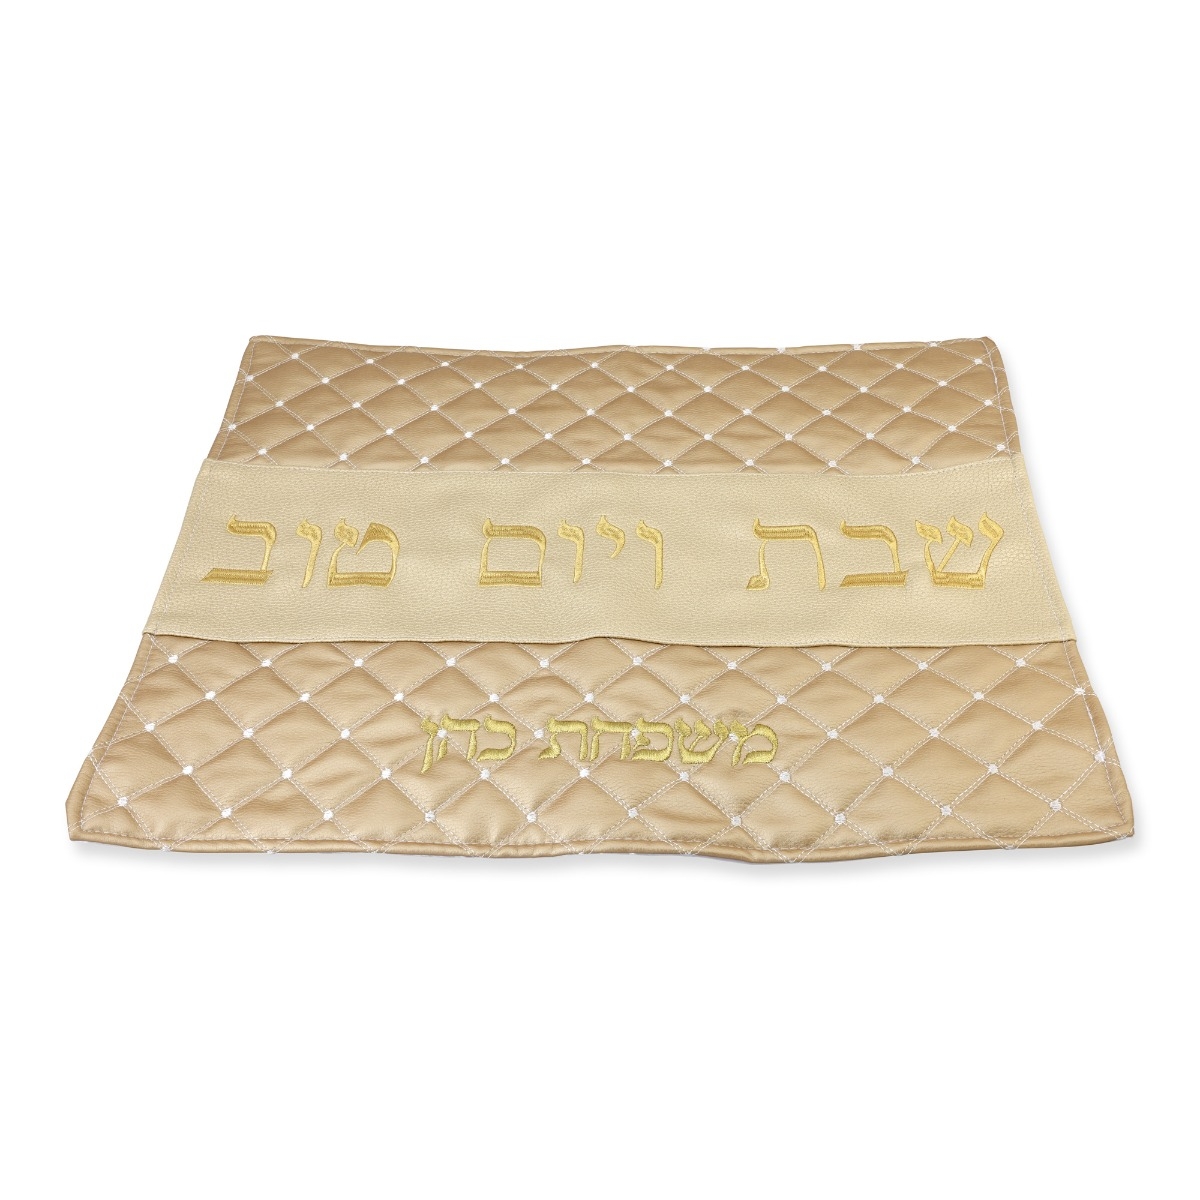 Personalized Embroidered Shabbat Challah Cover - Gold - 1